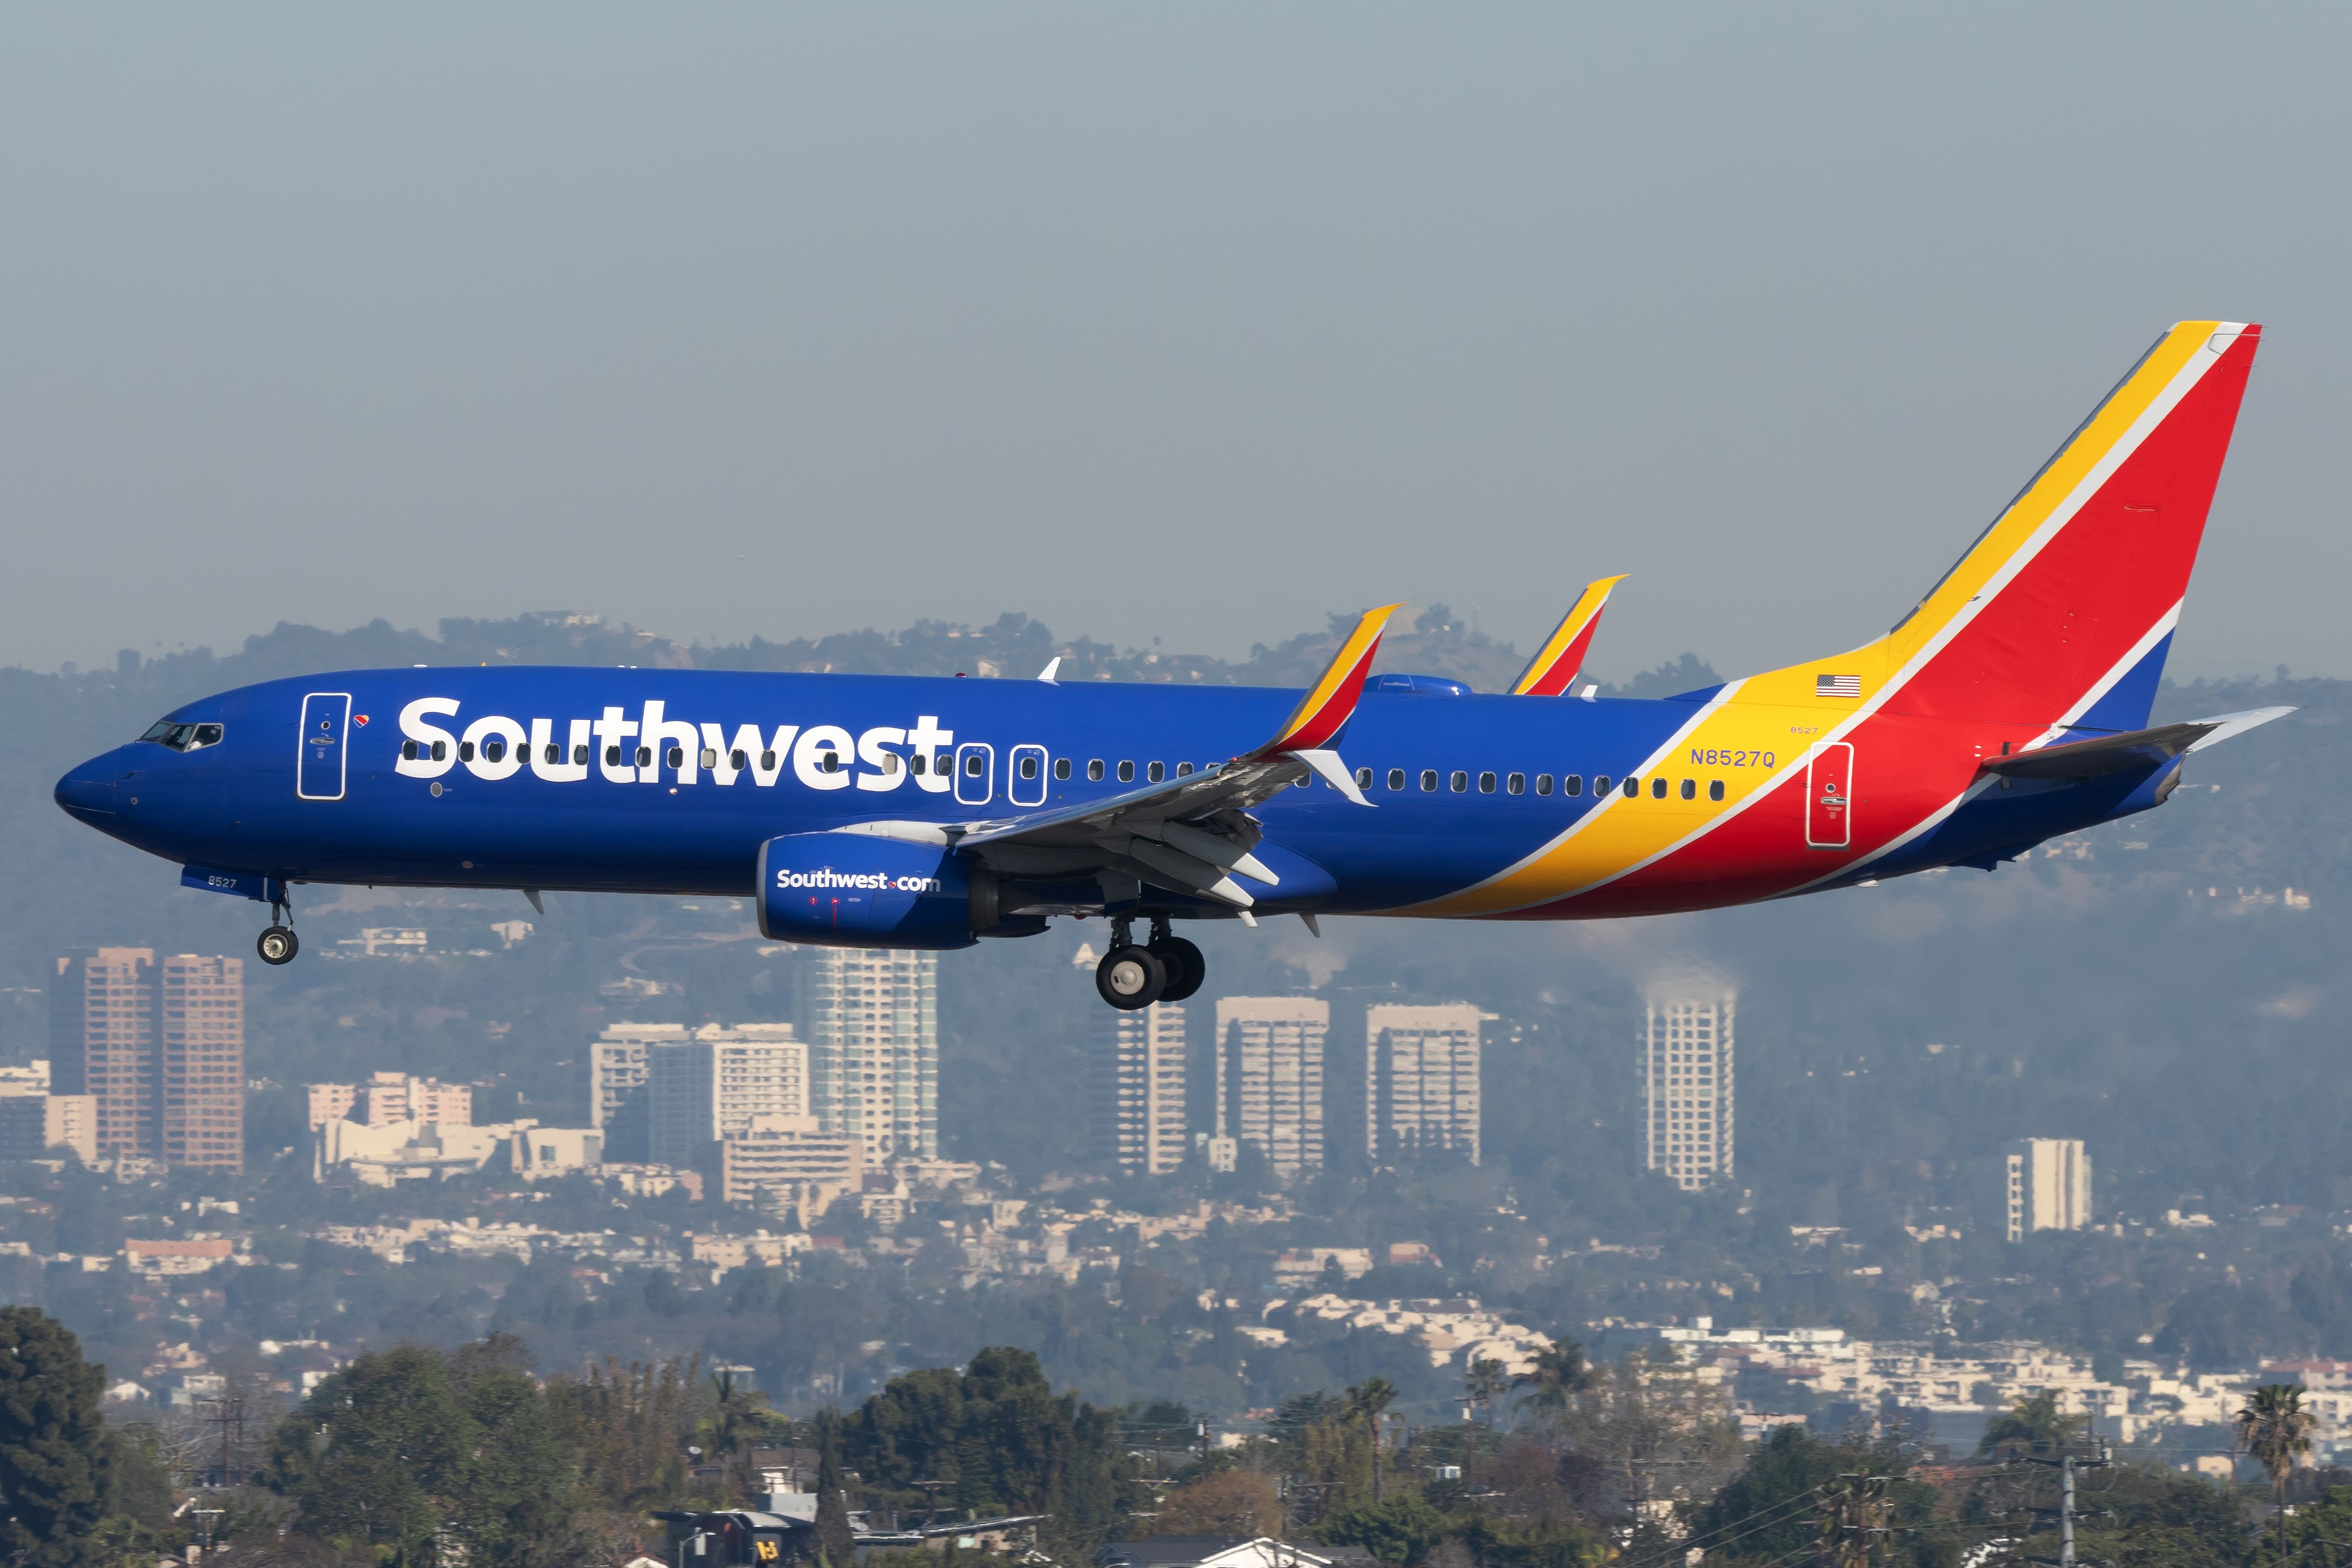 A blue Southwest Airline Boeing 737 with white lettering and a red and yellow tail flying near an urban area with tall buildings in the background